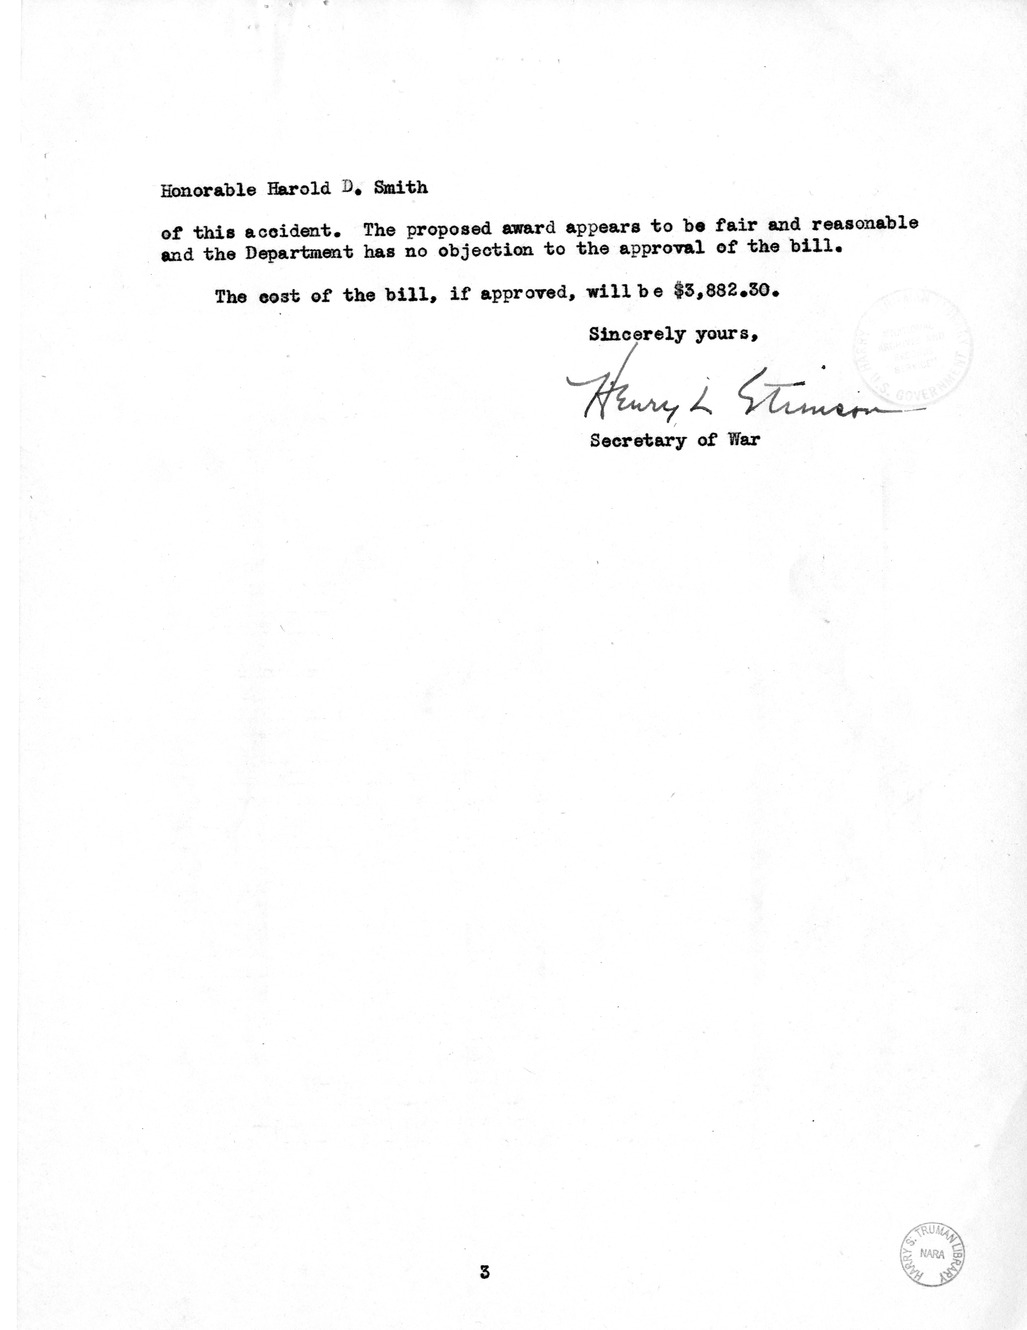 Memorandum from Frederick Bailey to M. C. Latta, H.R. 1007, For the Relief of Mrs. Beatrice Brown Waggoner, with Attachments